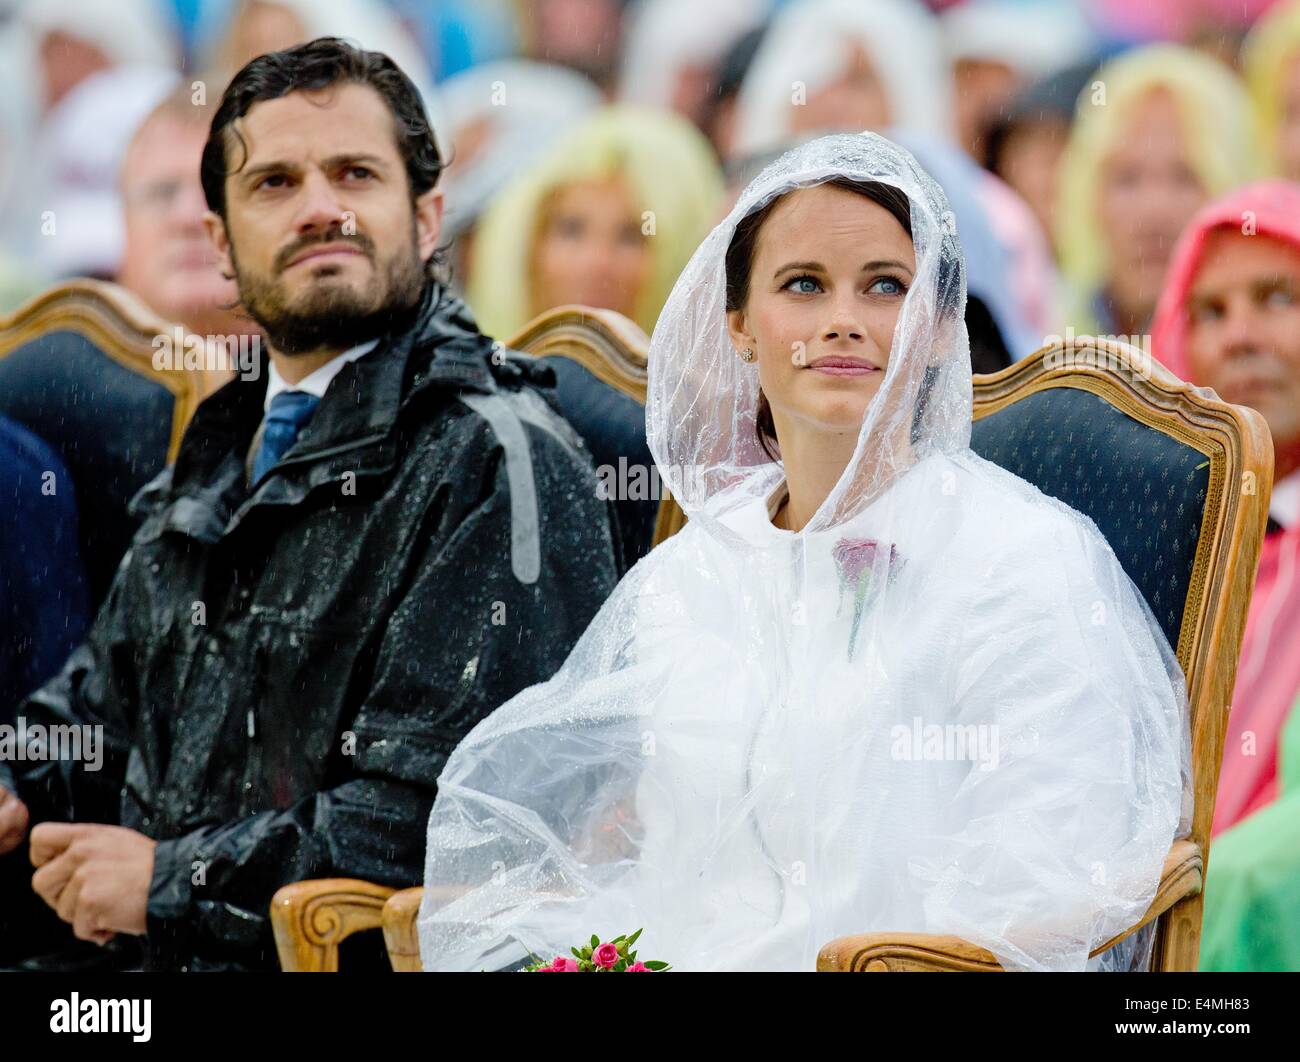 Prince Carl Philip of Sweden and his wife to be Sofia Hellqvist pose for photographs during the celebrations of Crown Princess' 37th birthday in Borgholm, Oeland island, Sweden, 14 July 2014. Photo: Patrick van Katwijk - NO WIRE SERVICE - Stock Photo